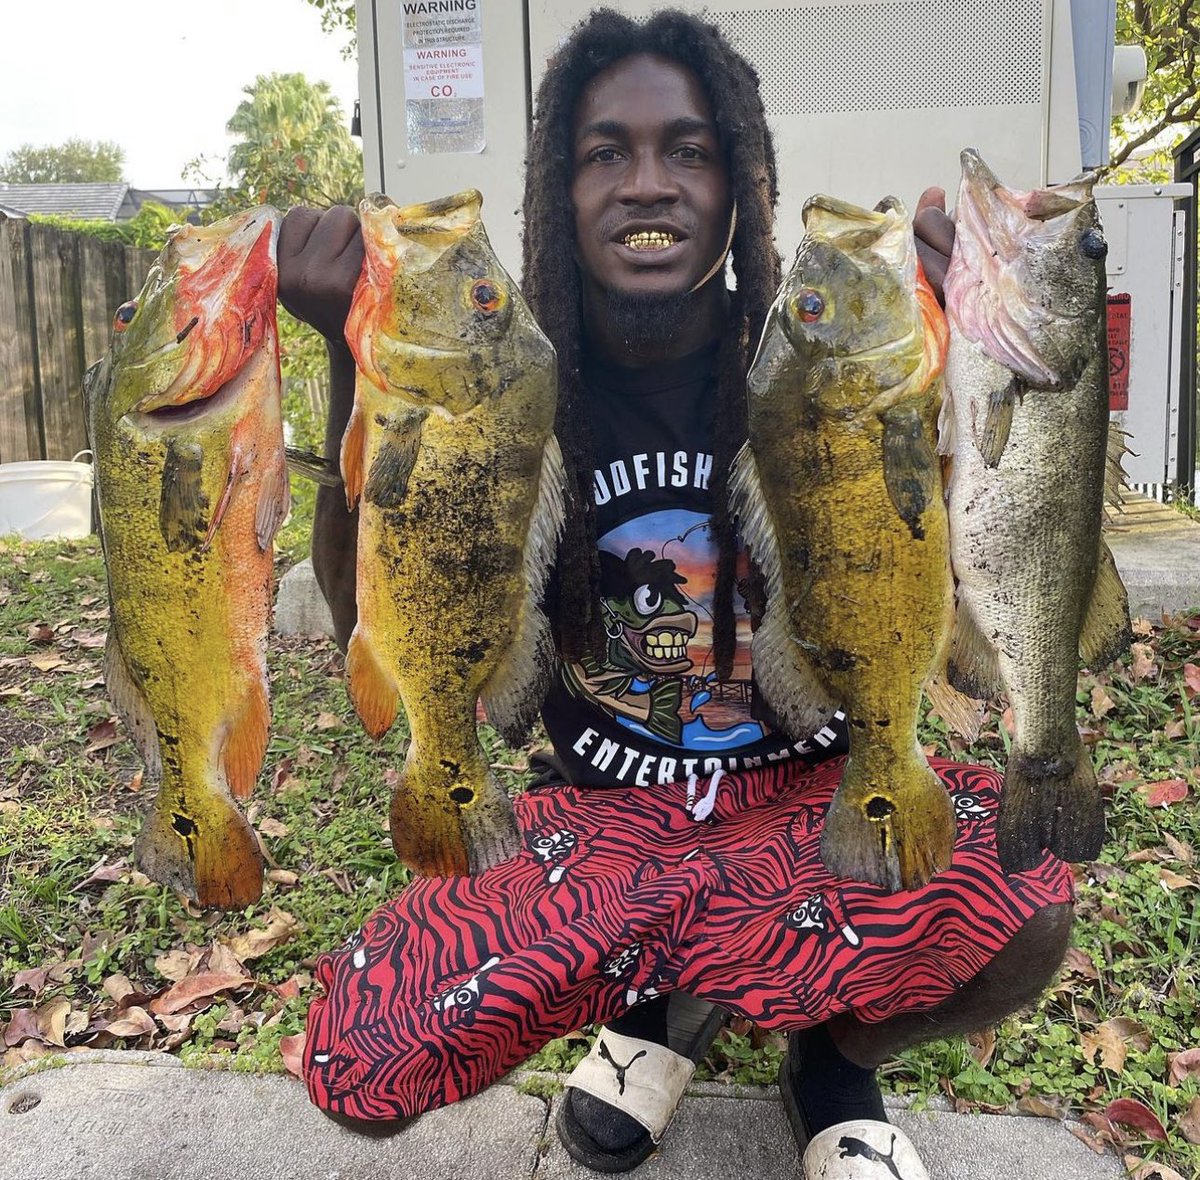 Popular Florida fisherman 'Hoodfishing' was reportedly shot in his hometown of Fort Myers.